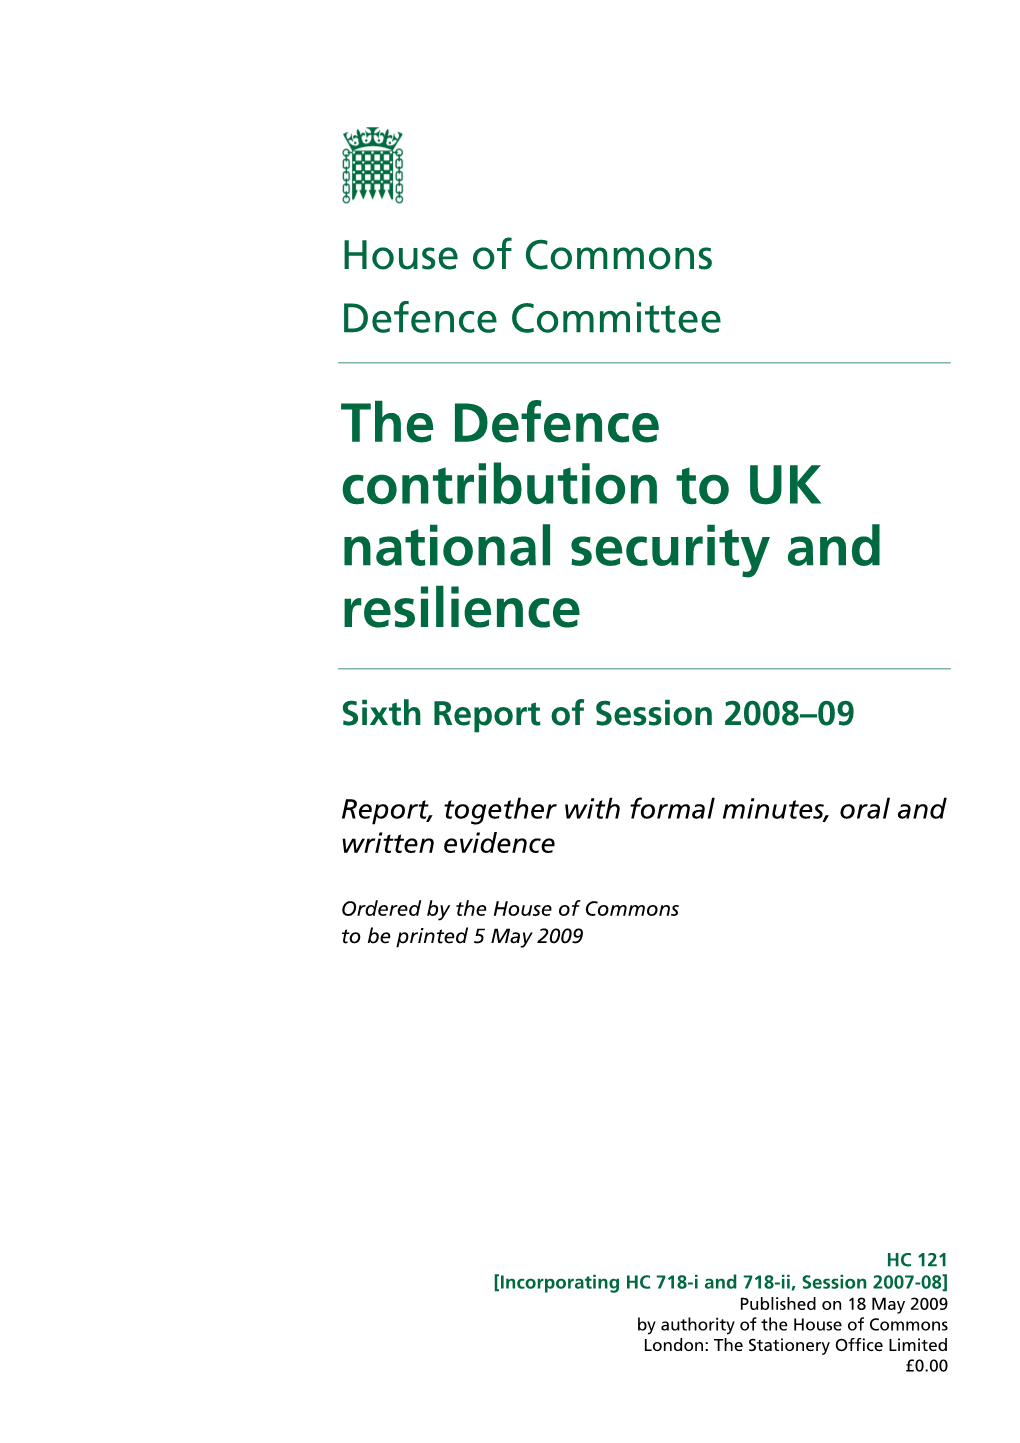 The Defence Contribution to UK National Security and Resilience